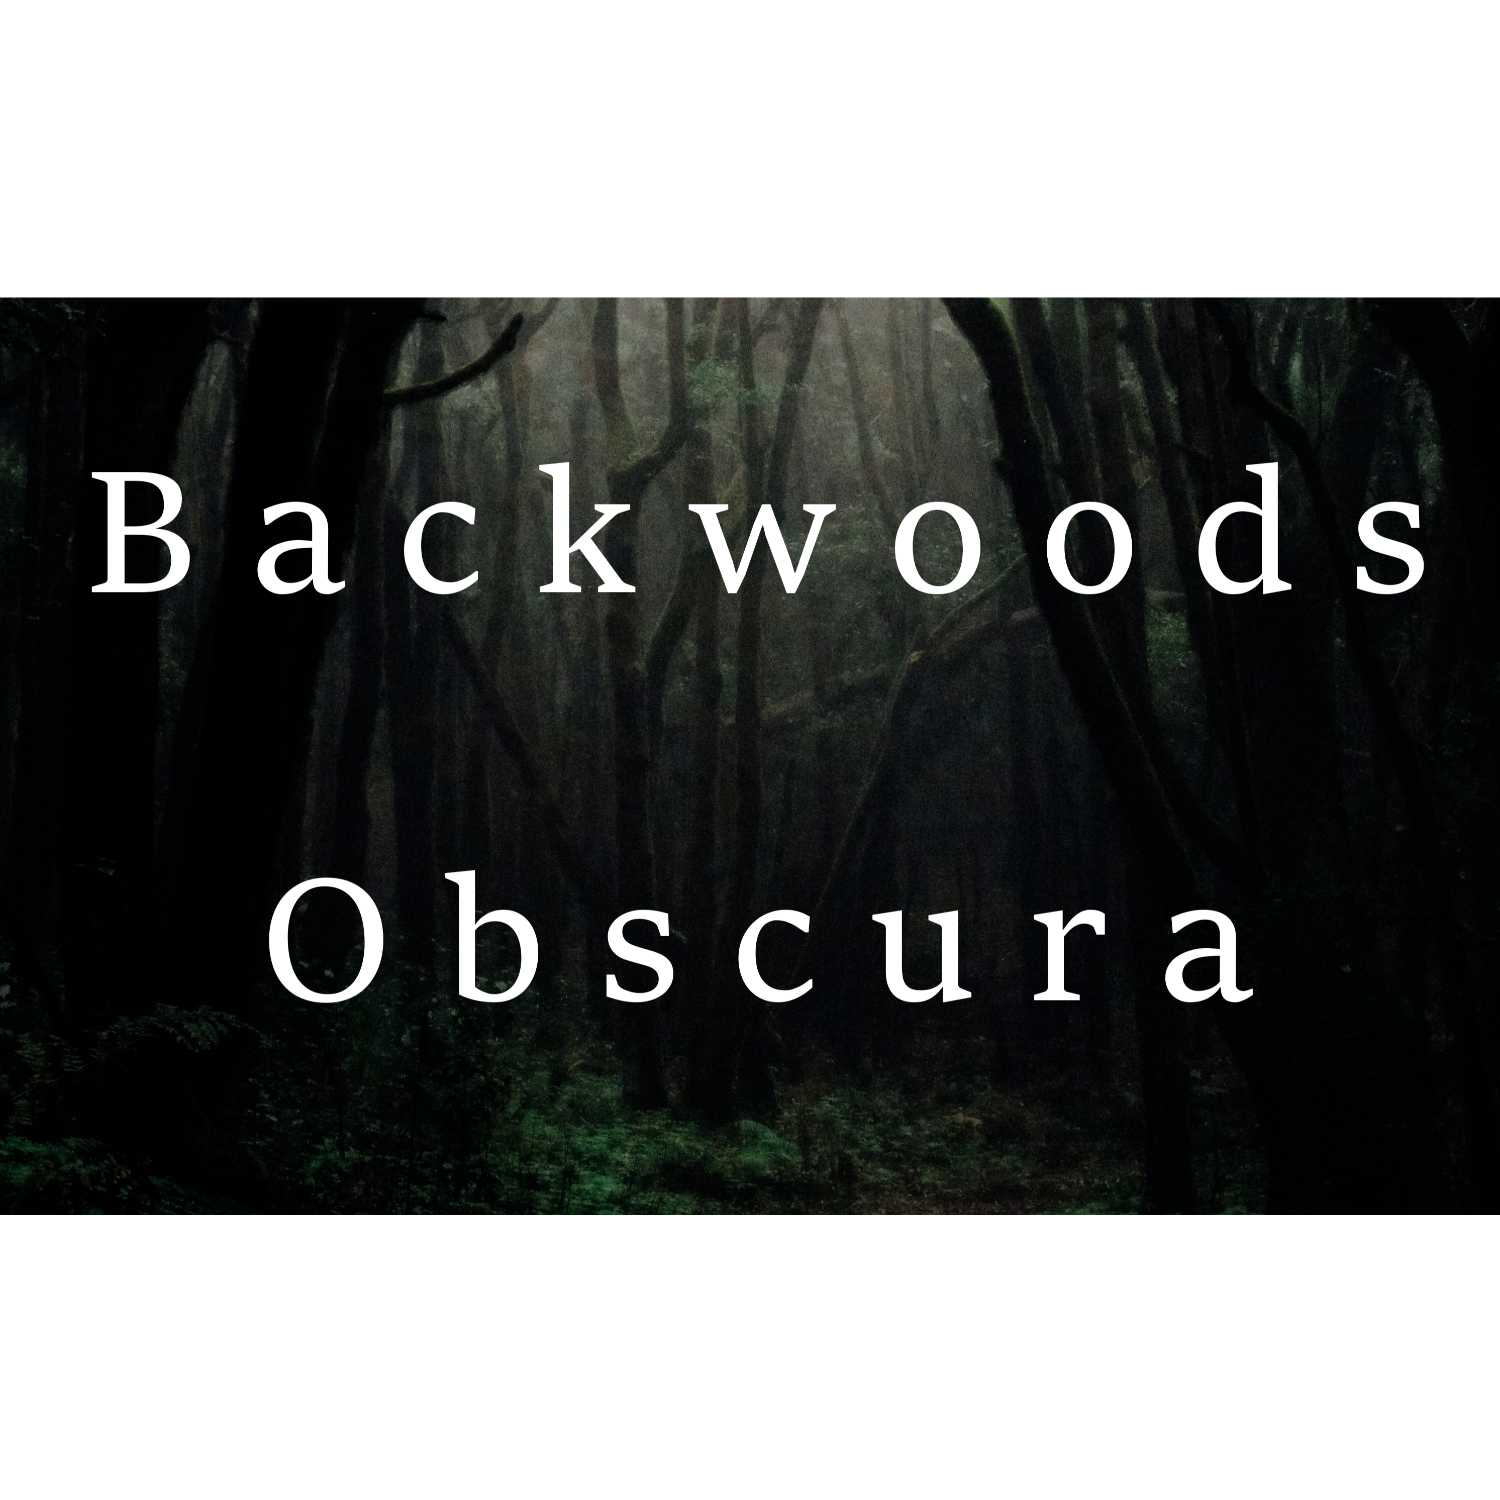 0102 - The Curse of The Rougarou - Louisiana's Werewolf - Backwoods Obscura